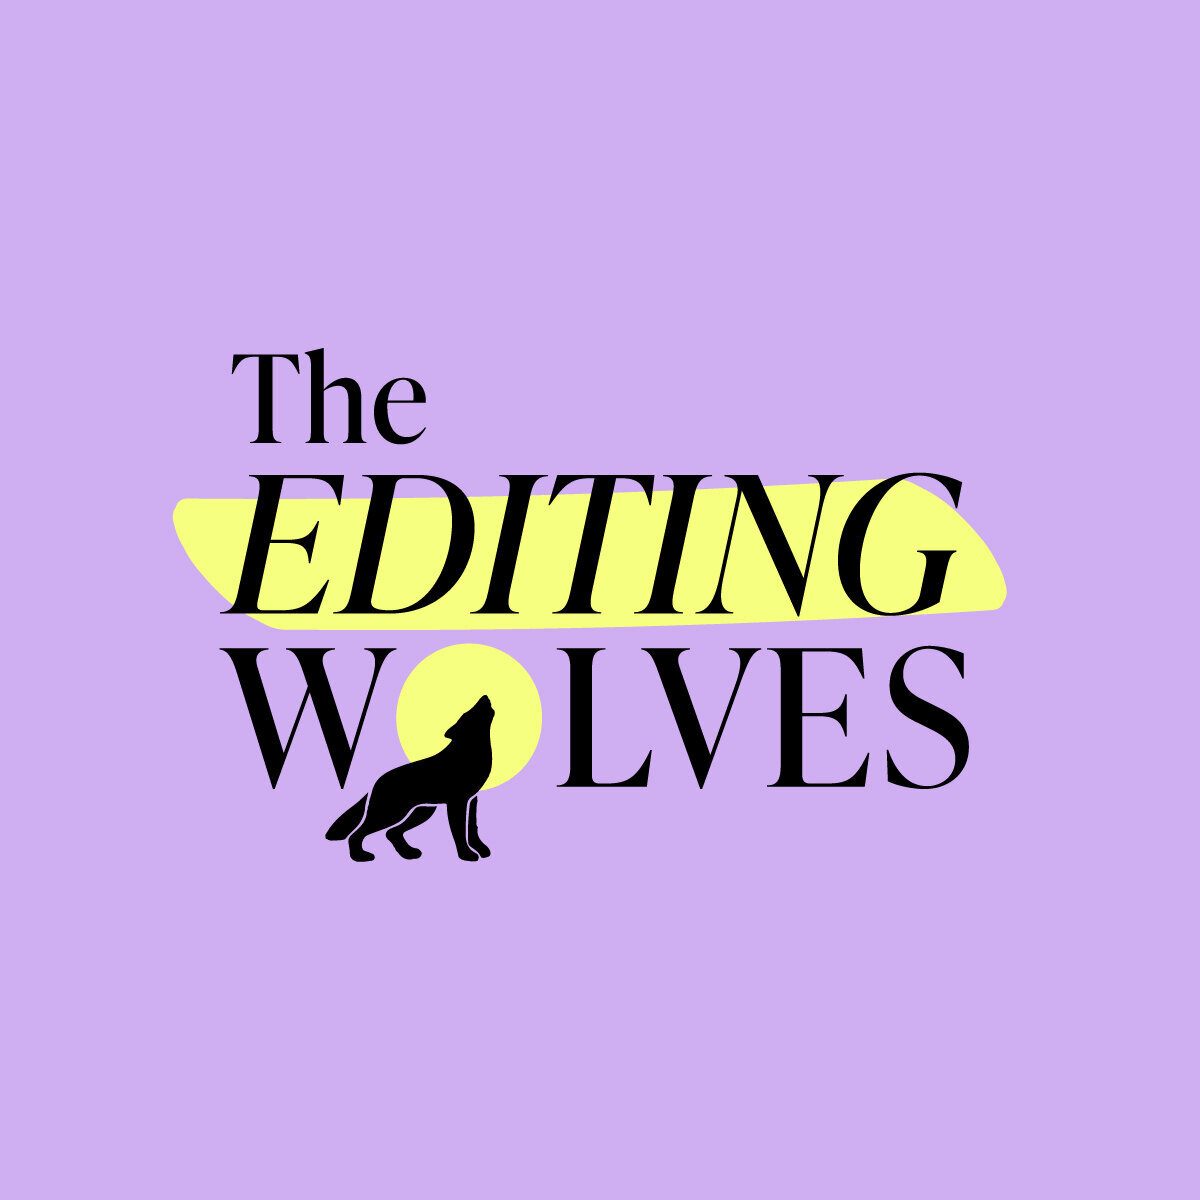 The-Editing-Wolves-Final-Logo-Files